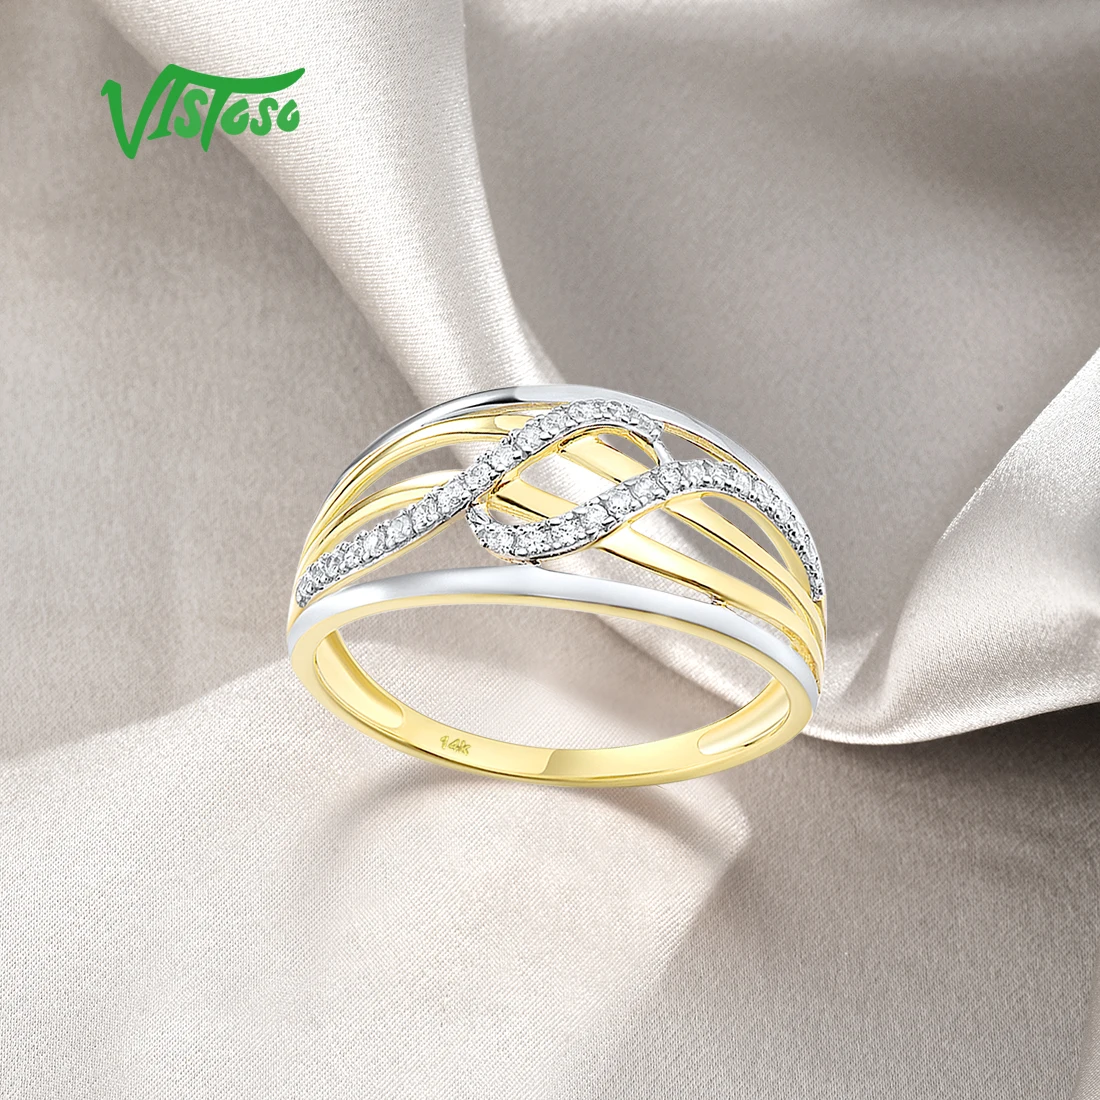 Sarvada Jewels Anniversary Women''s Diamond Rings Yellow Gold, Packaging  Type: Box, Size: Free Size at Rs 21920 in Surat